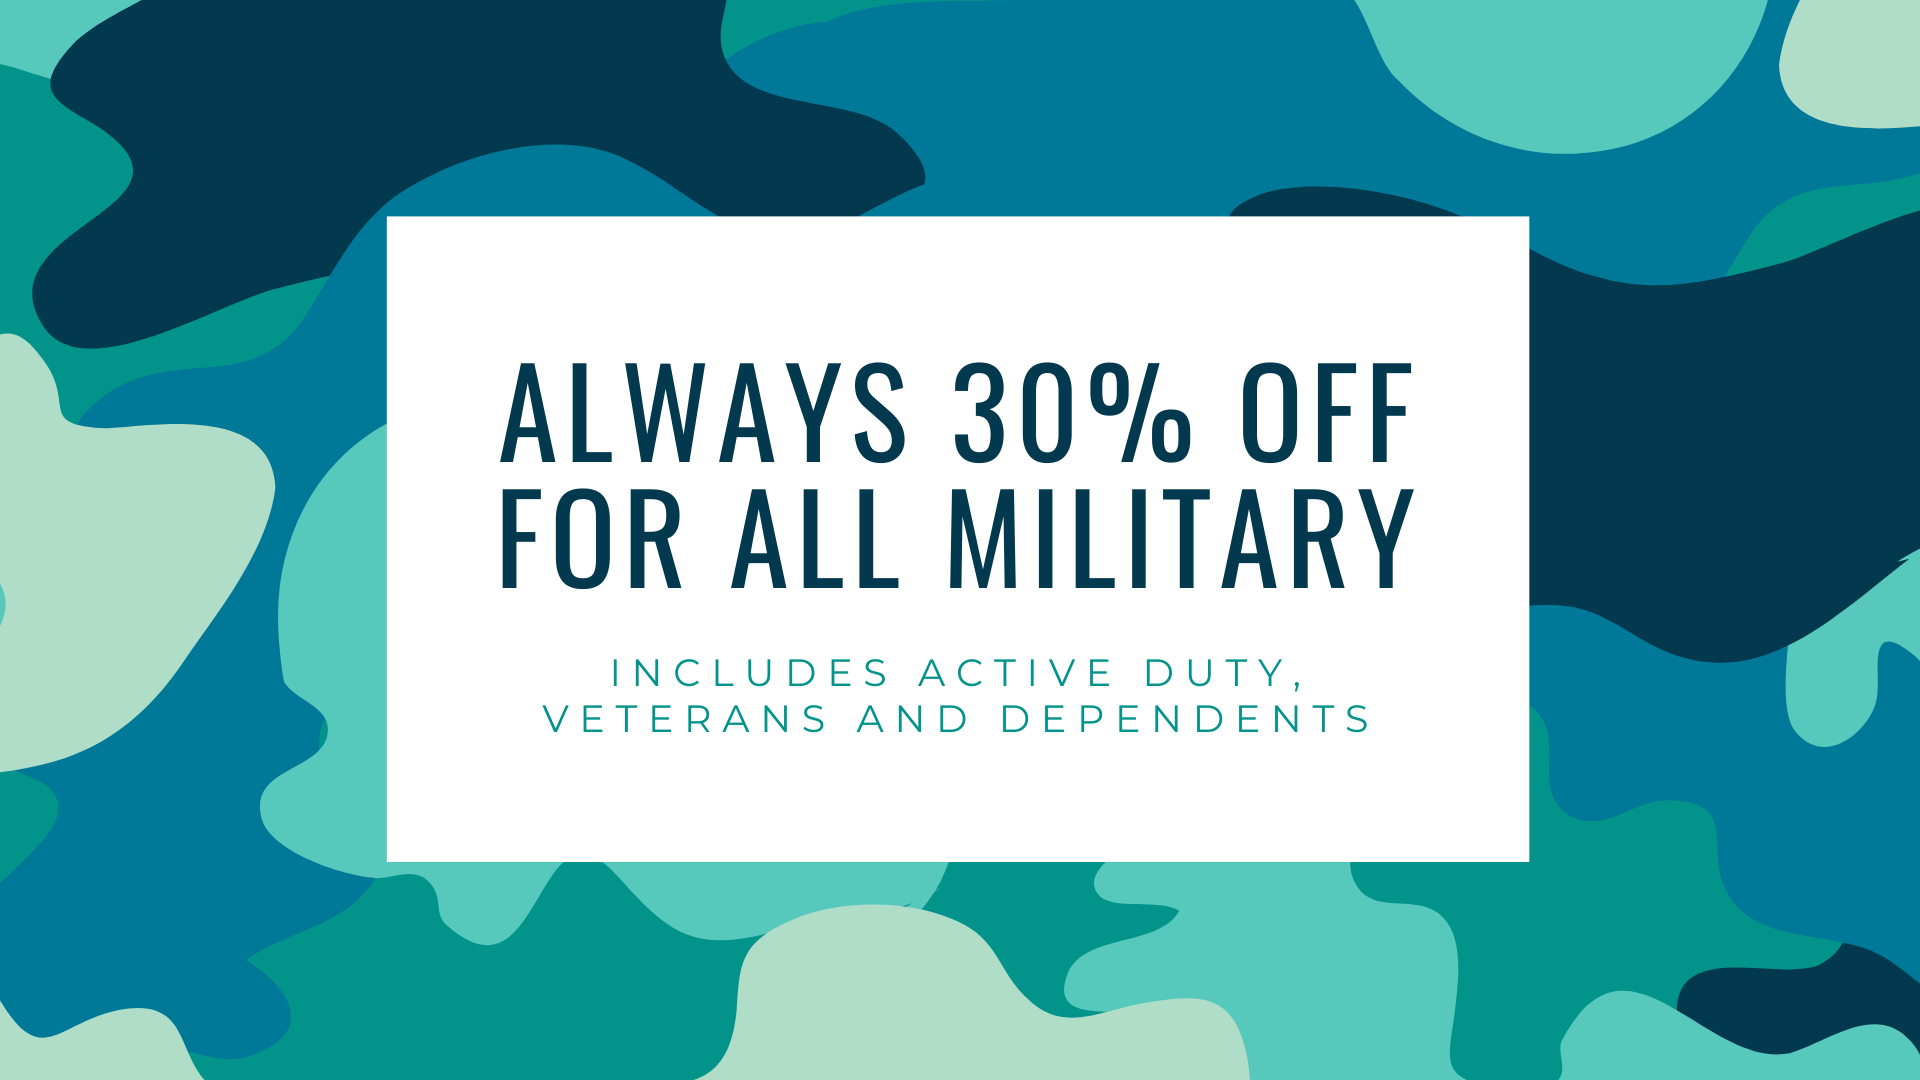 always 30% off for all military includes active duty, veterans and dependents